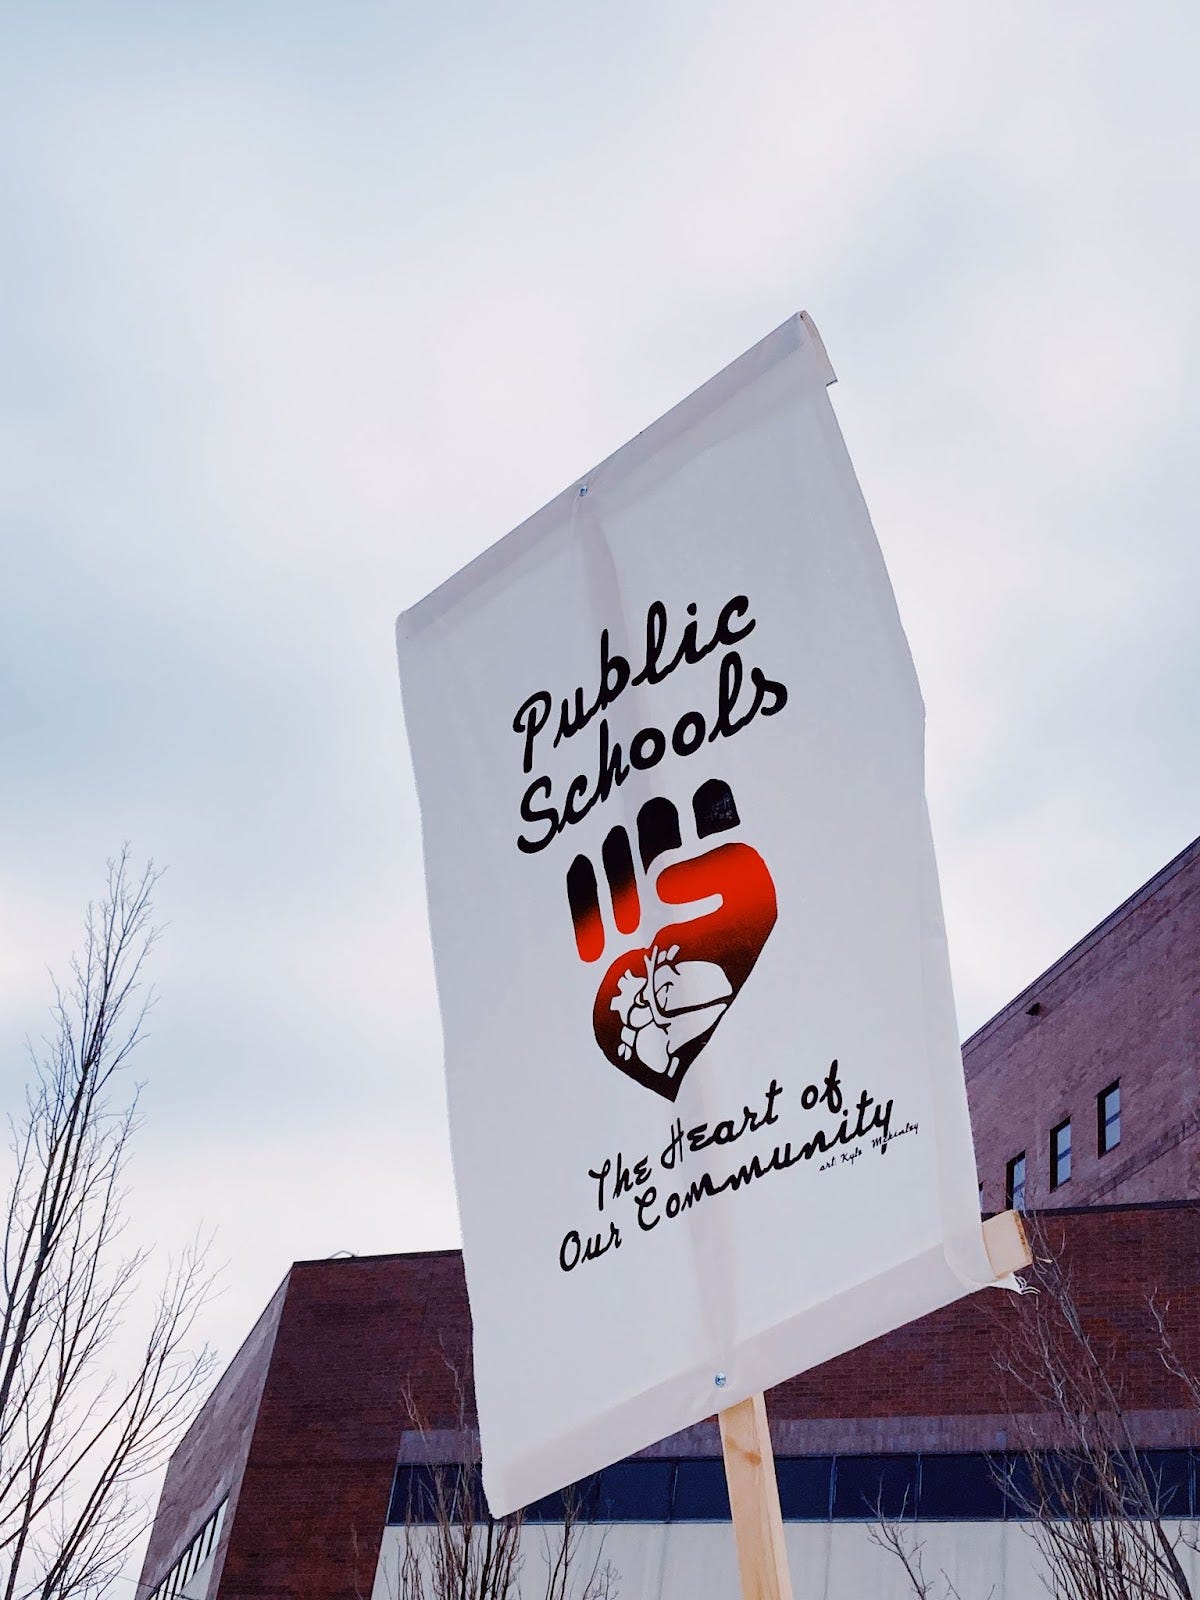 "Public Schools, the heart of our community" is written on black script on a white tarp sign with a logo of a red and black fist with an anatomical heart in the palm.